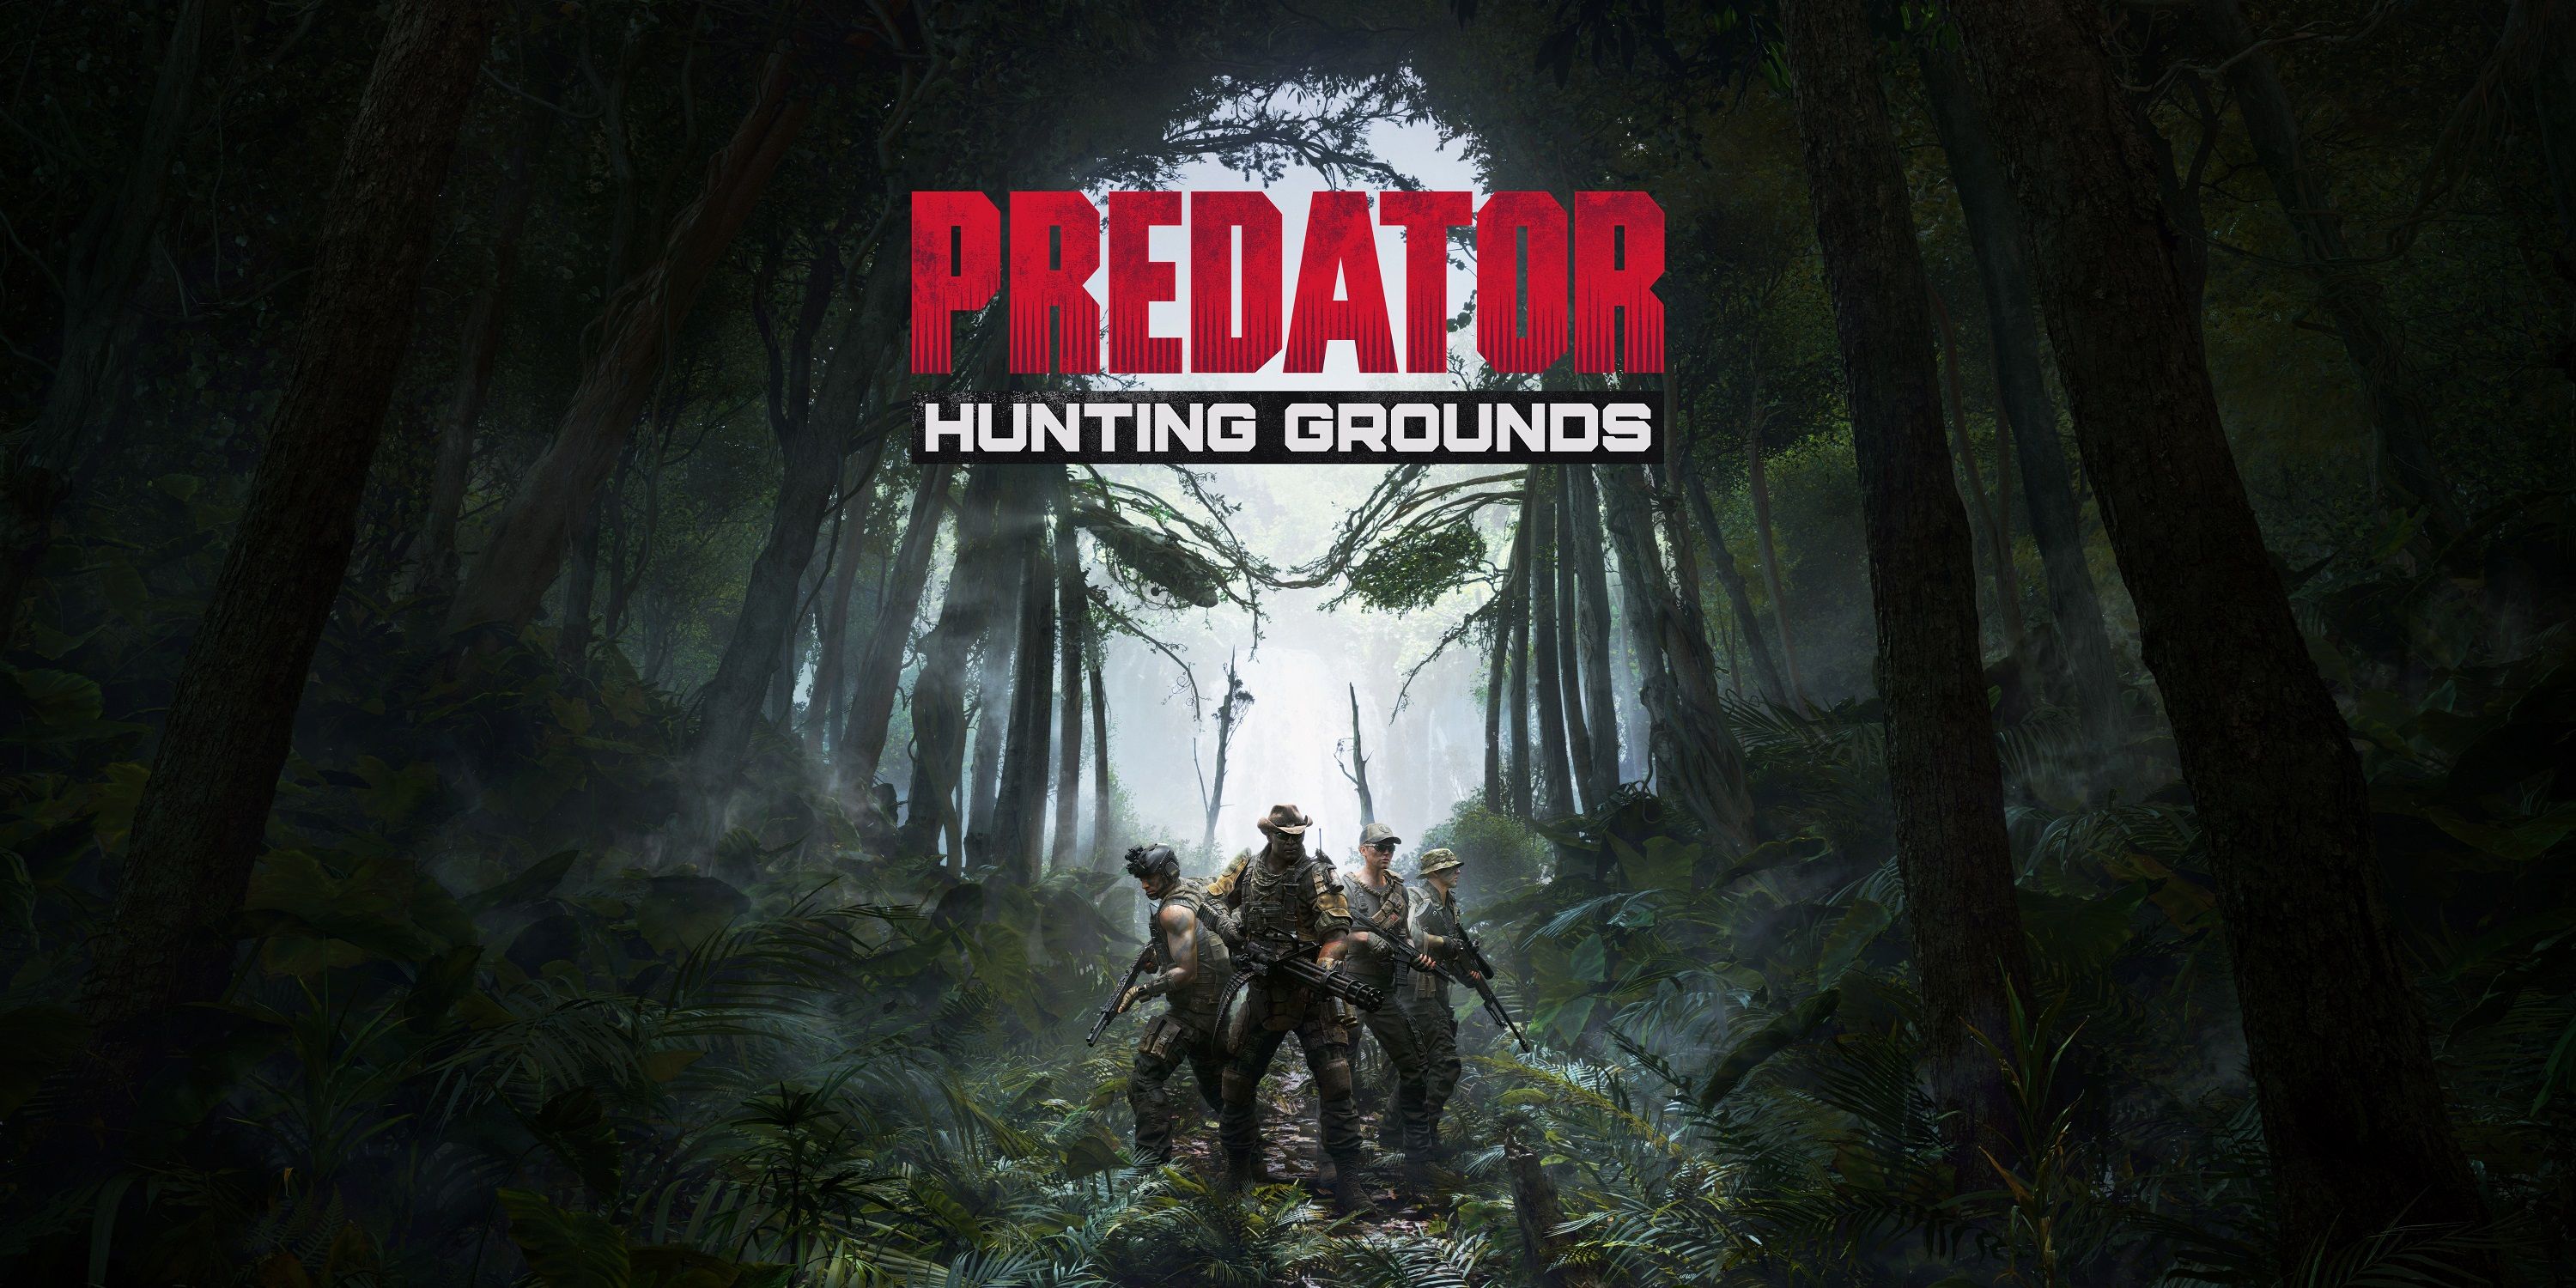 Mercenaries walk through the jungle with the face of the Predator behind them